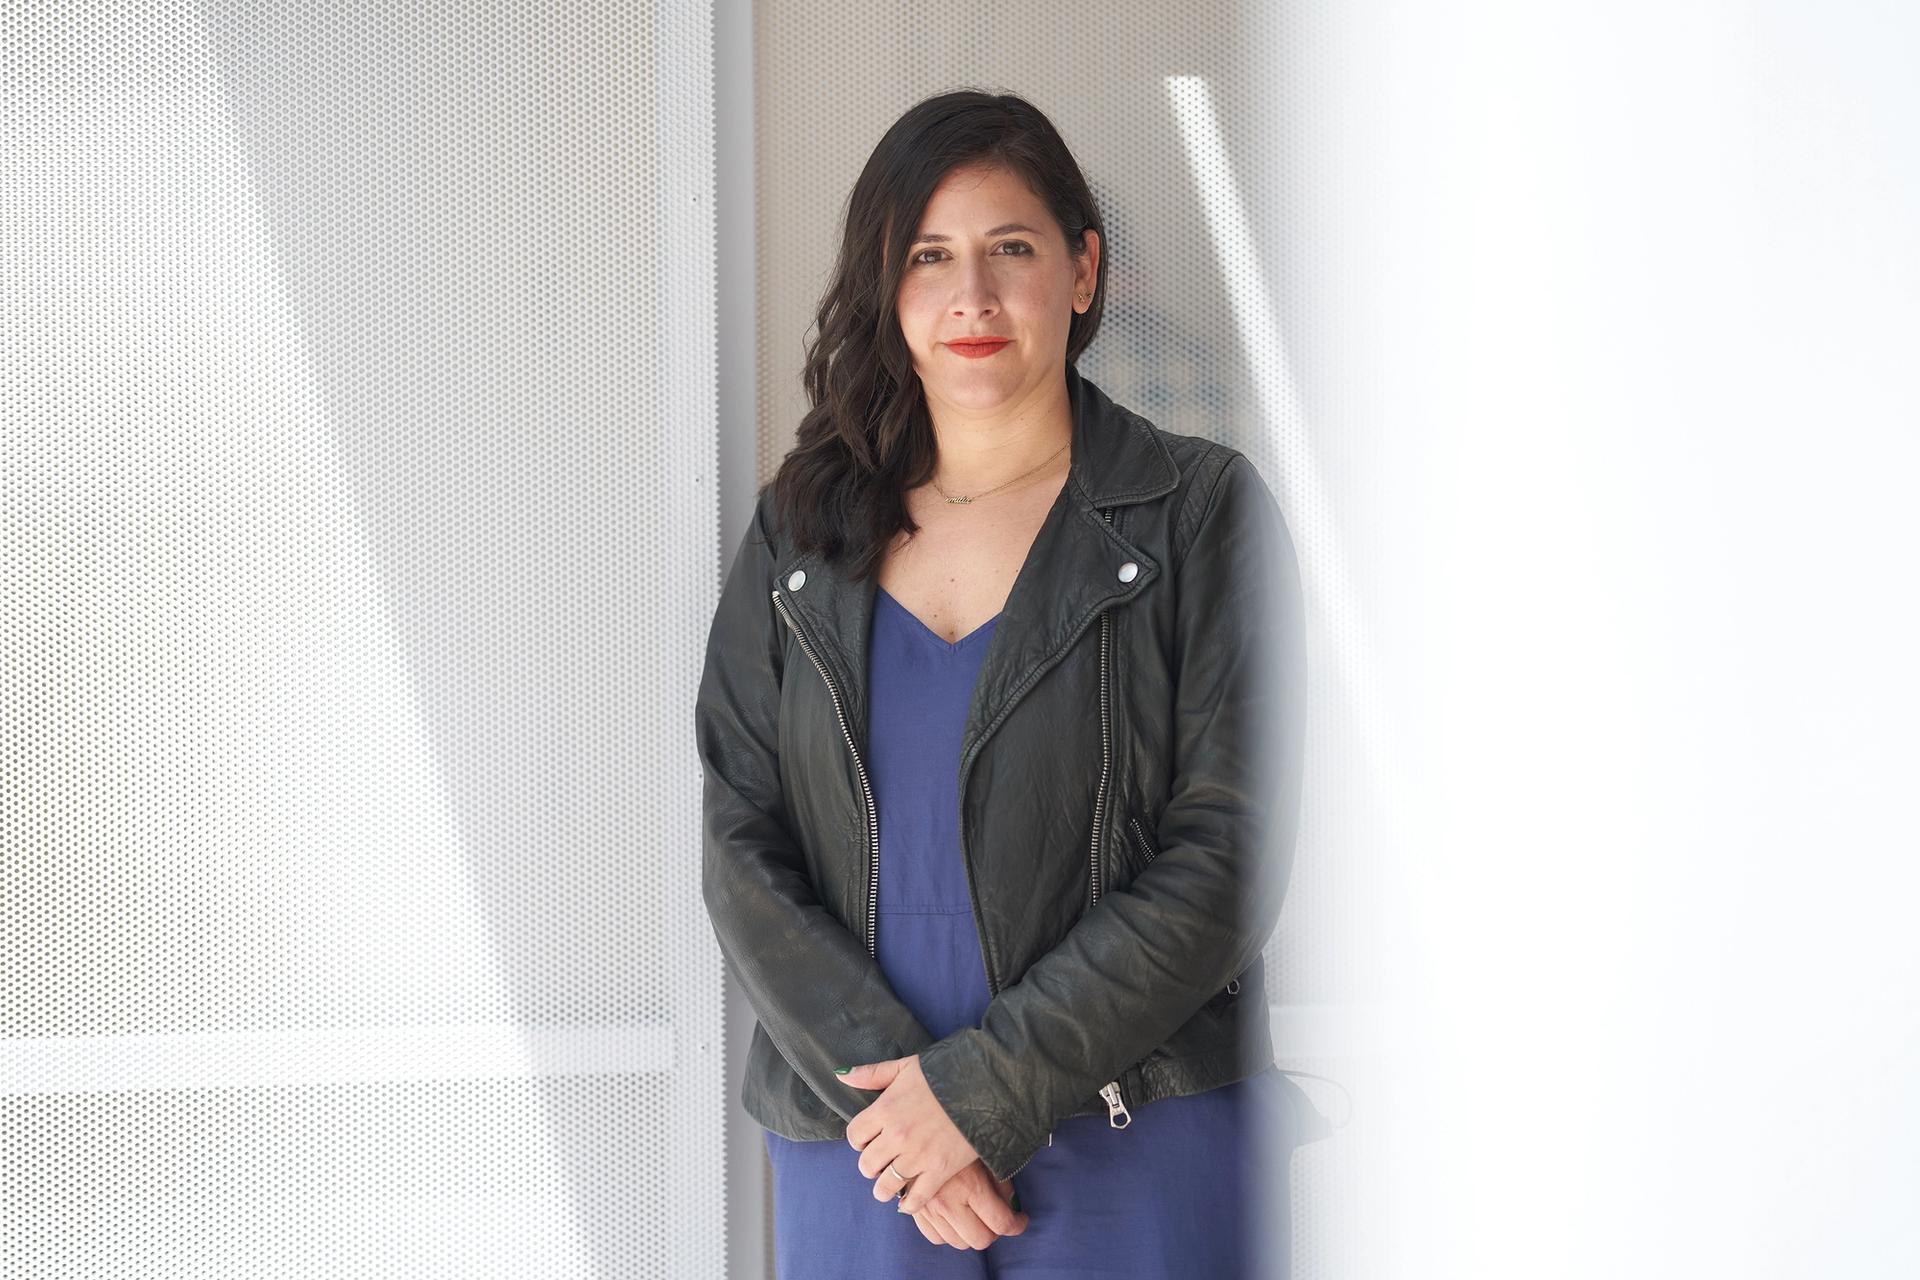 Marcela Guerrero, an associate curator at the Whitney Museum of American Art